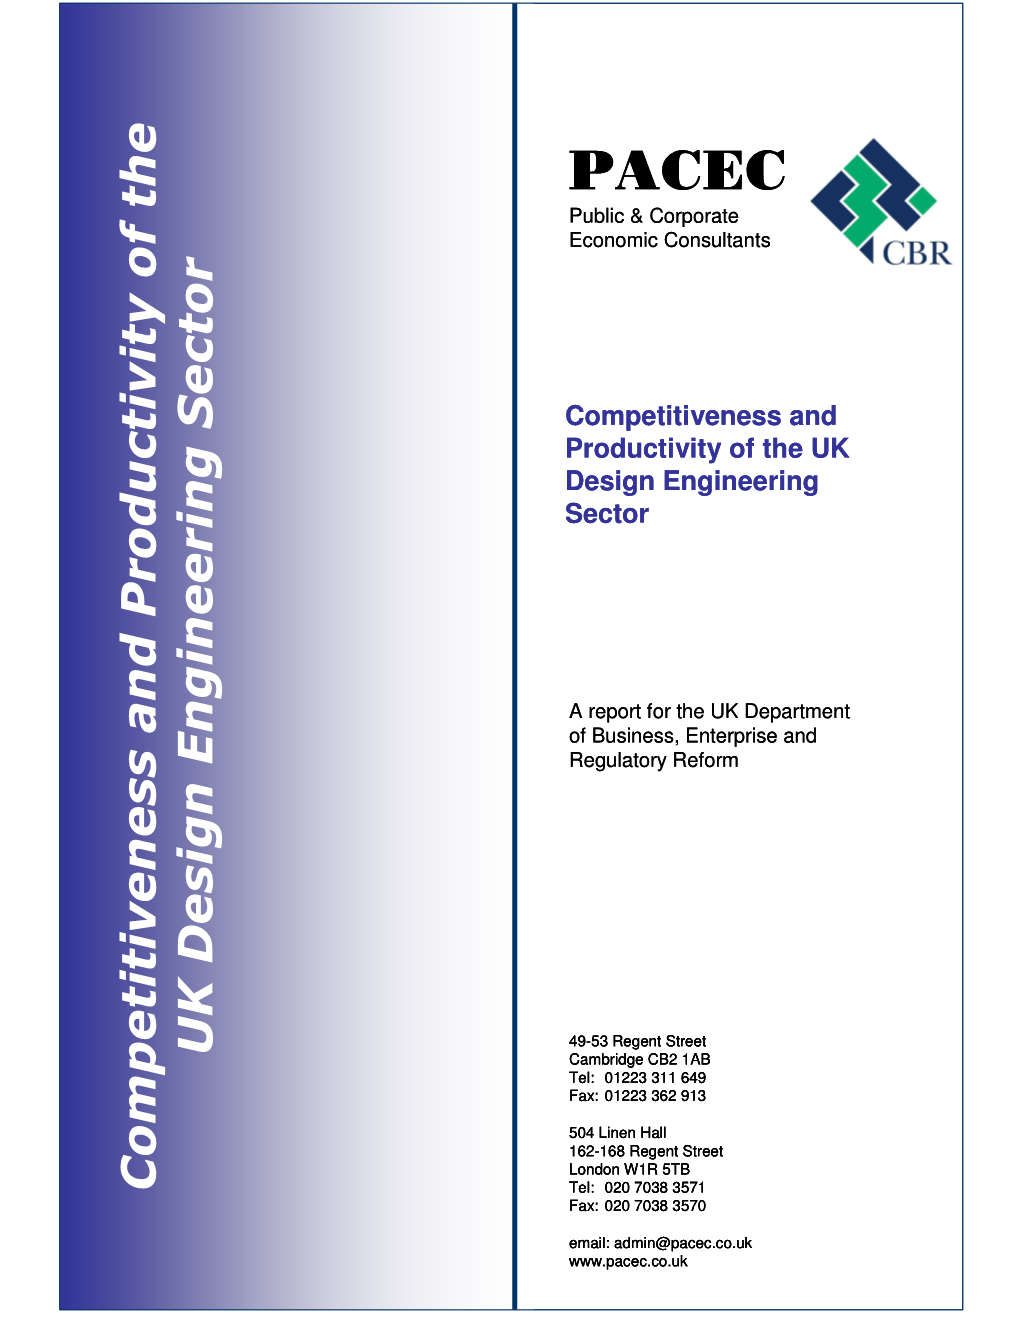 Competitiveness and Productivity of the UK Design Engineering Sector